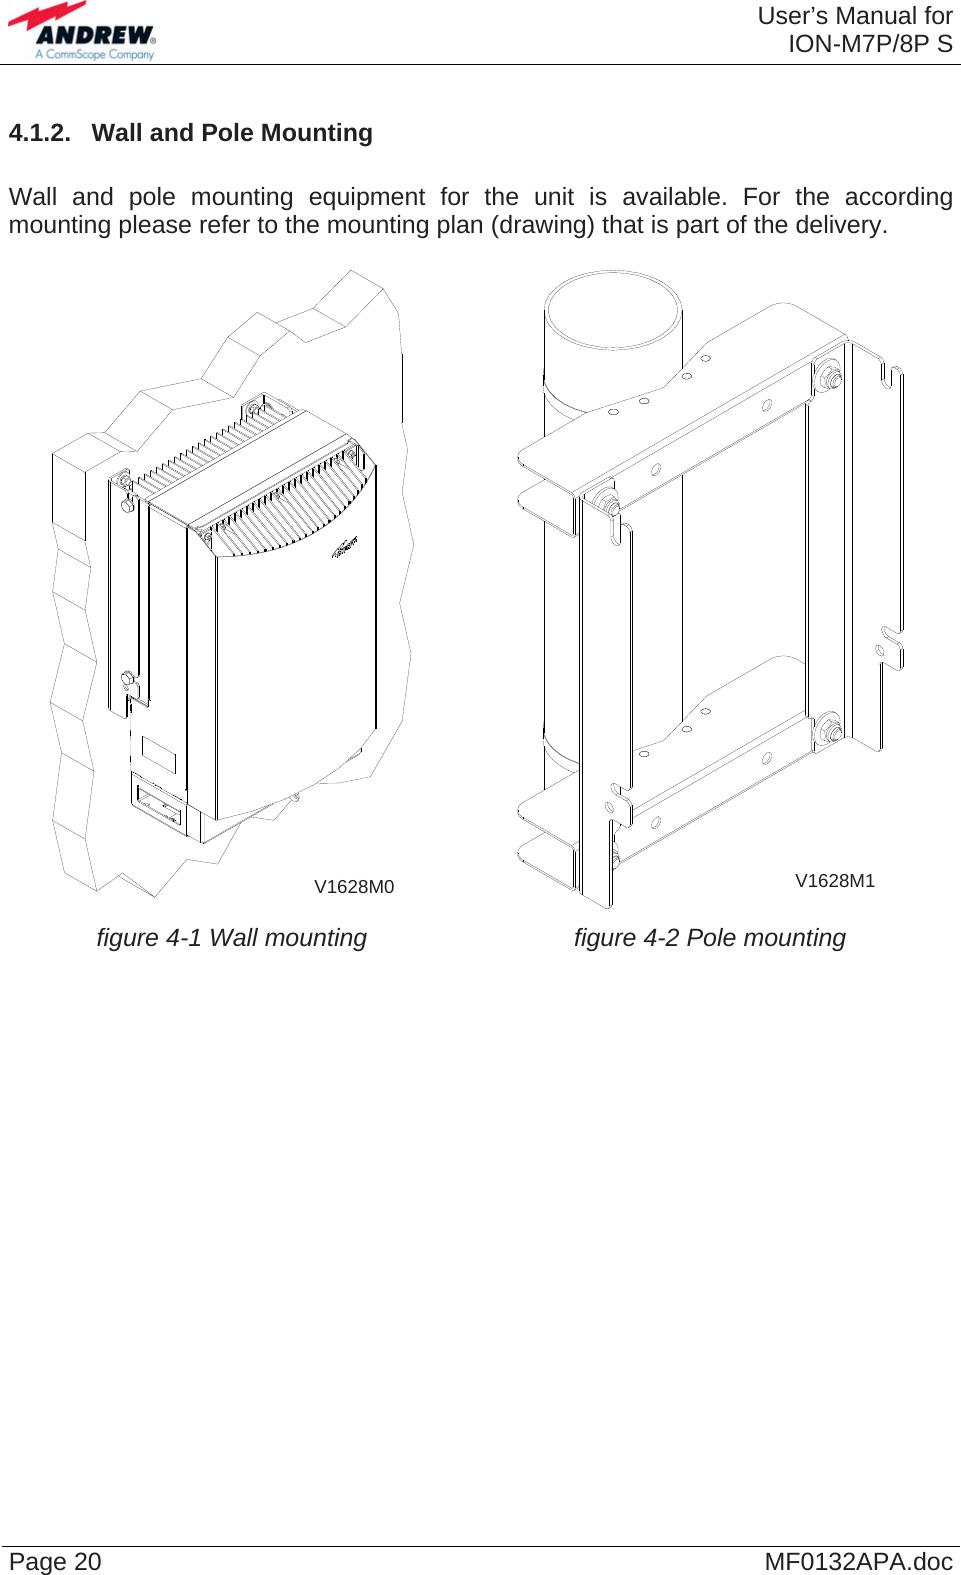  User’s Manual forION-M7P/8P S Page 20  MF0132APA.doc4.1.2.  Wall and Pole Mounting  Wall and pole mounting equipment for the unit is available. For the according mounting please refer to the mounting plan (drawing) that is part of the delivery.    figure 4-1 Wall mounting  figure 4-2 Pole mounting V1628M1 V1628M0    